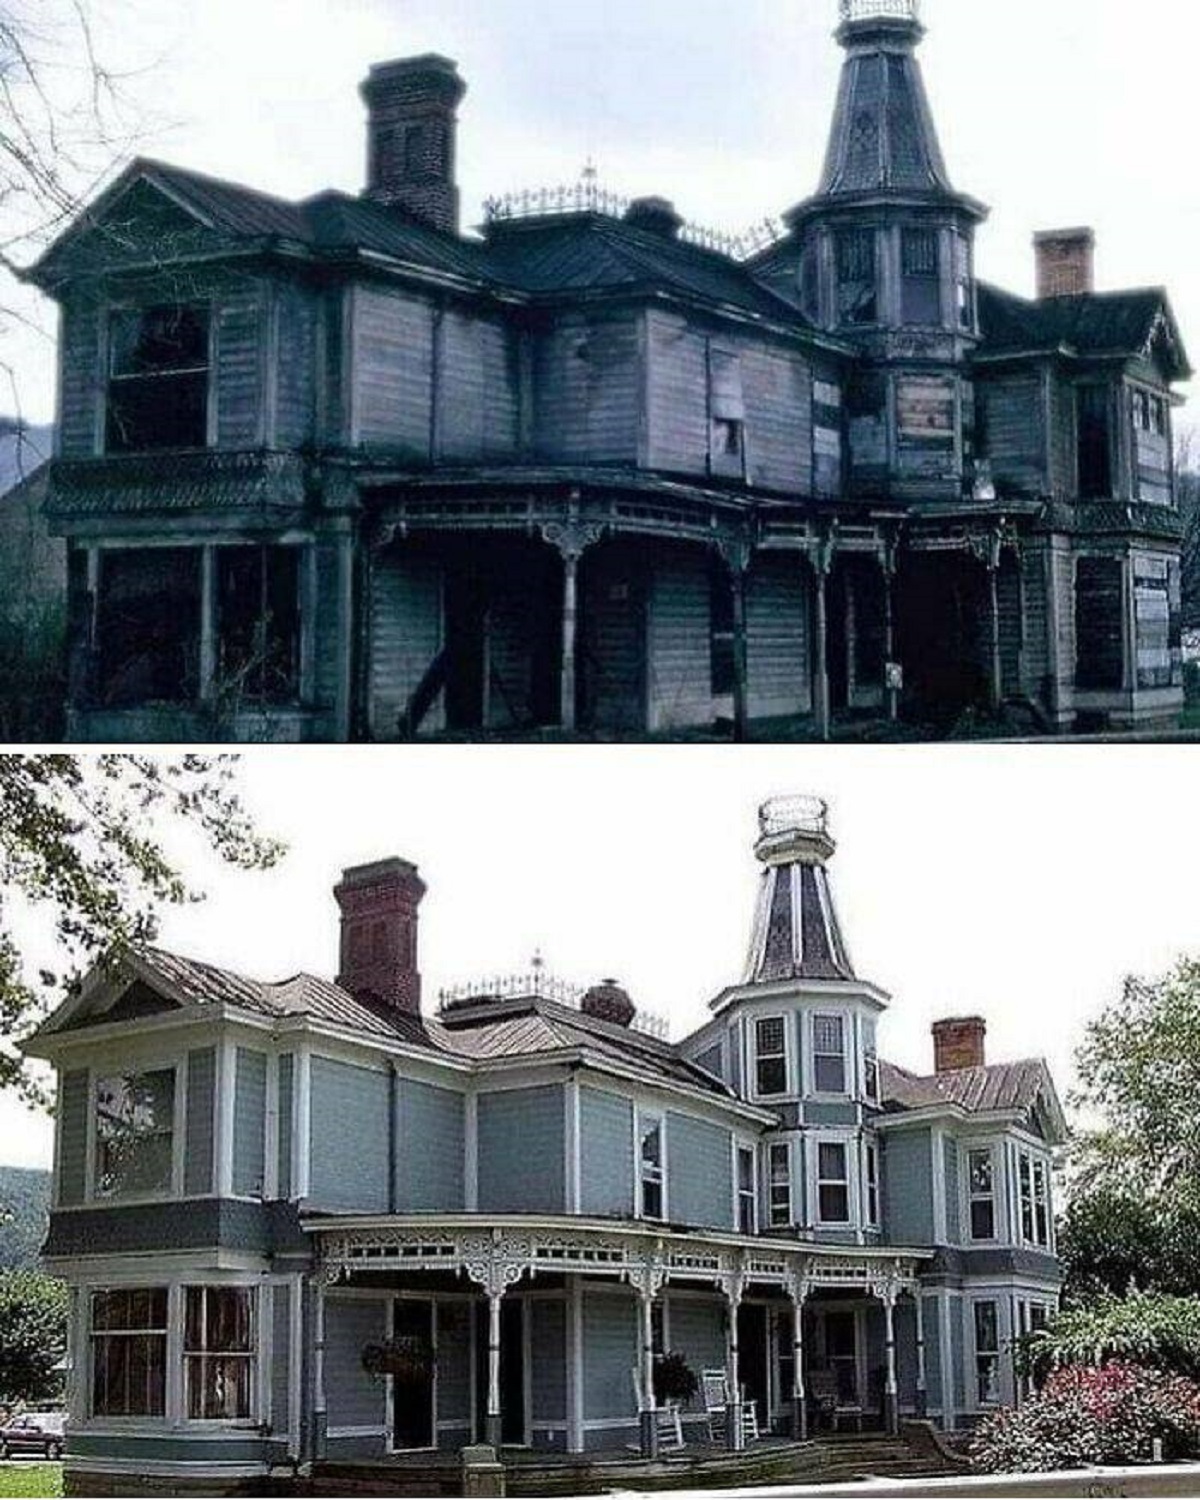 "An Abandoned Victorian Home Has Been Dramatically Restored In Rarden, Ohio, USA"